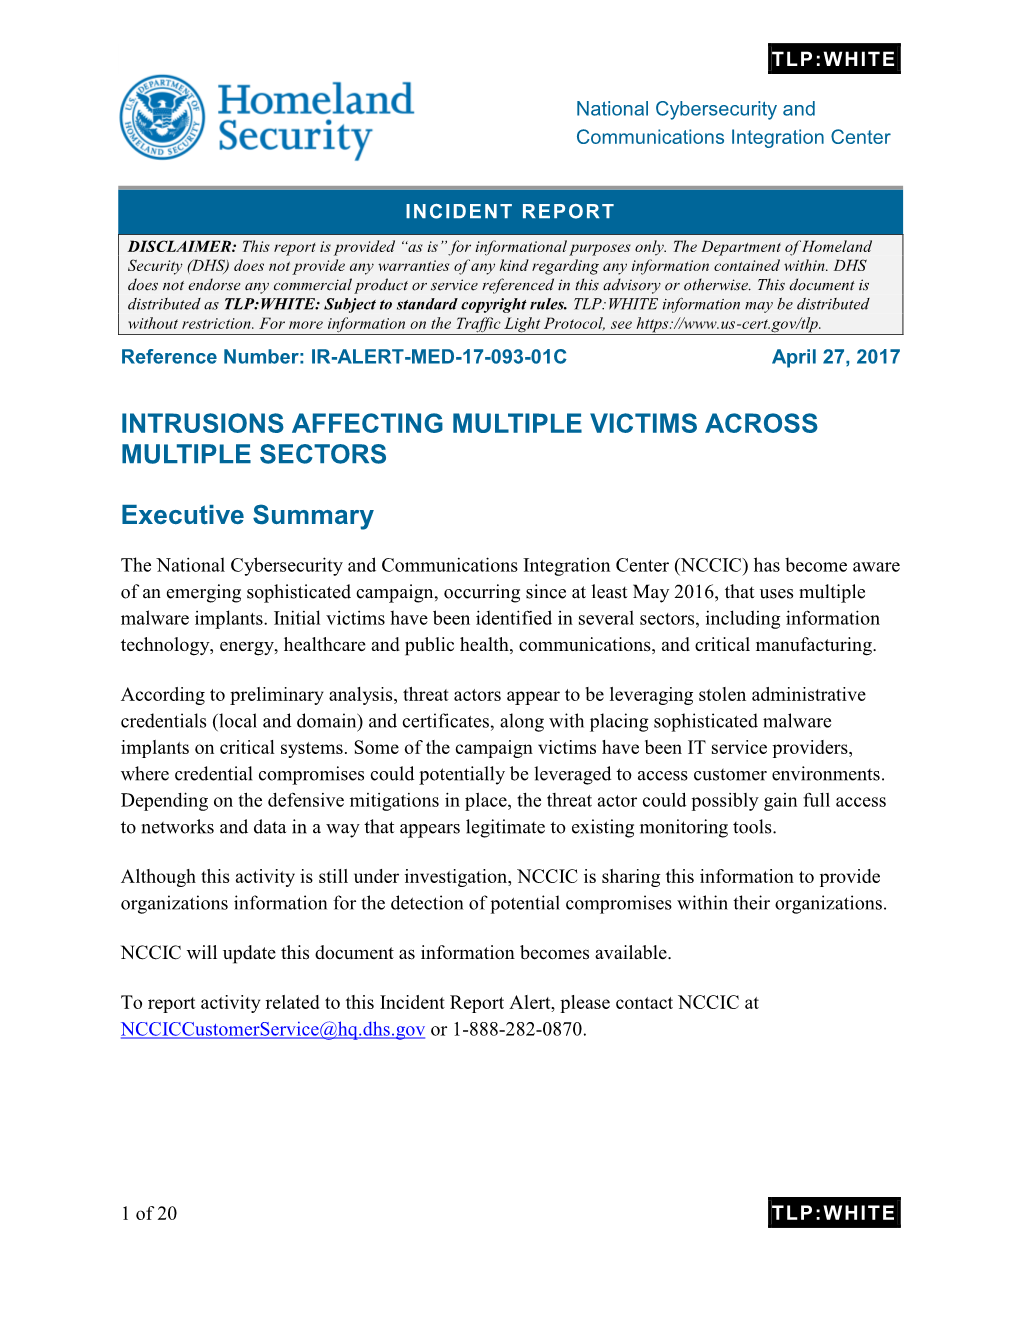 INTRUSIONS AFFECTING MULTIPLE VICTIMS ACROSS MULTIPLE SECTORS Executive Summary